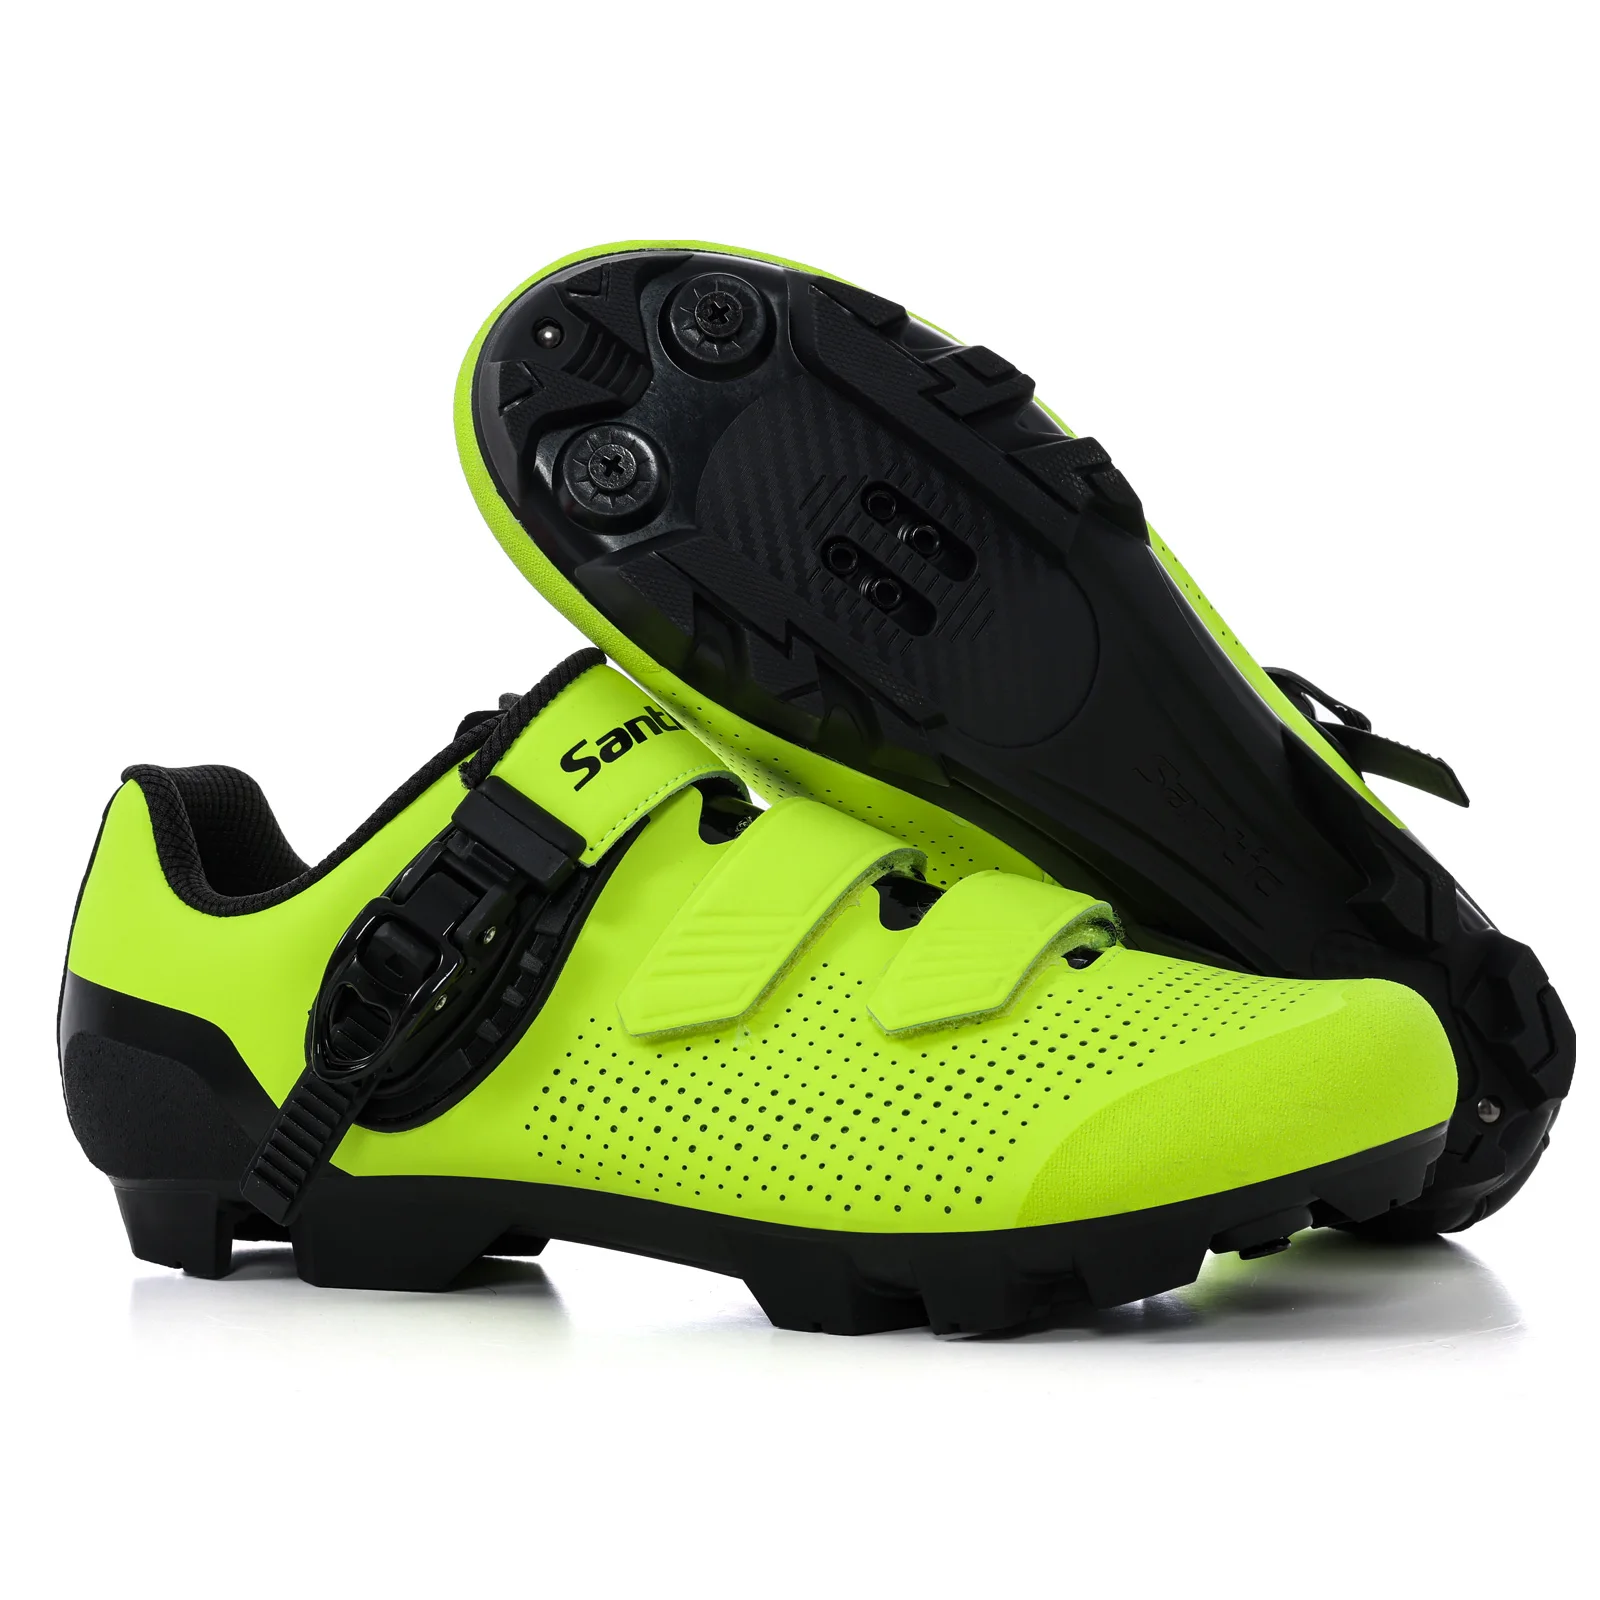 santic-cycling-mountain-locking-shoes-men-bike-power-outdoor-sports-mtb-adult-comfortable-casual-sneakers-bike-shoes-unisex